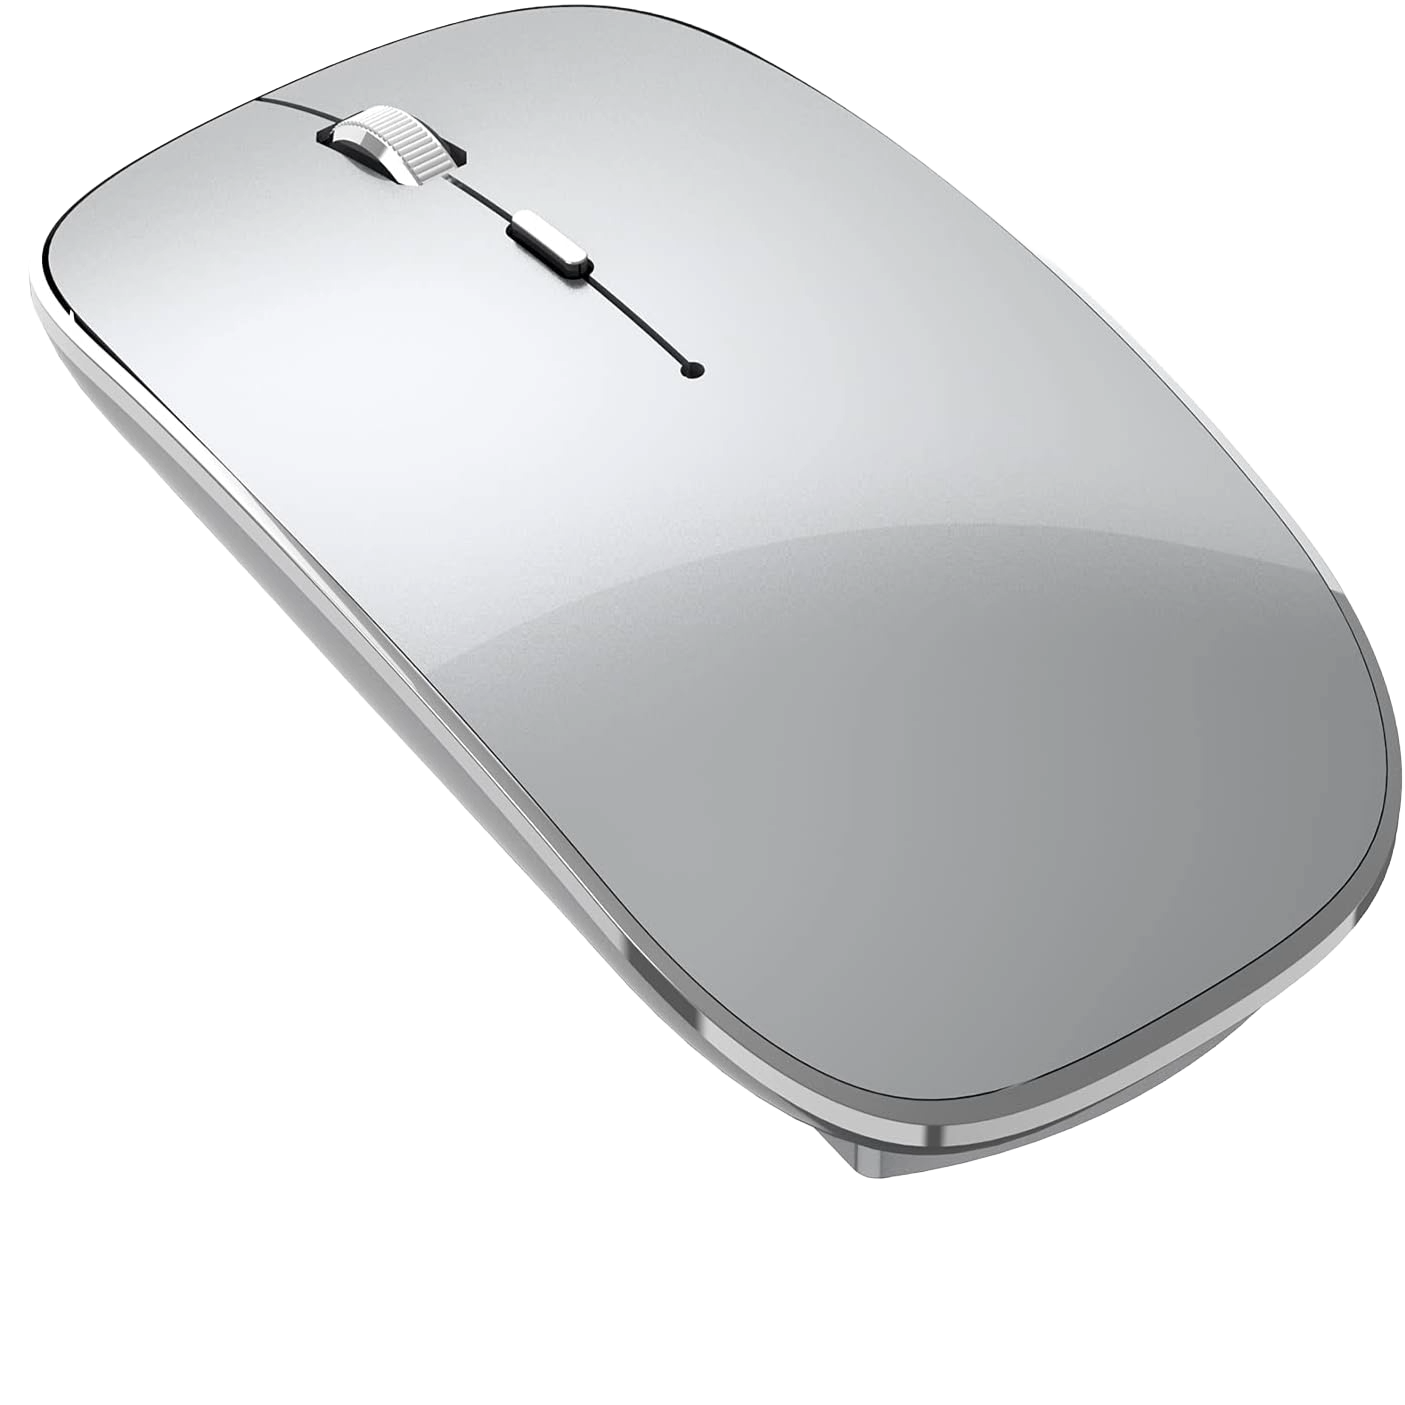 A render of the Halpit USB-C Wireless Mouse on a transparent background.